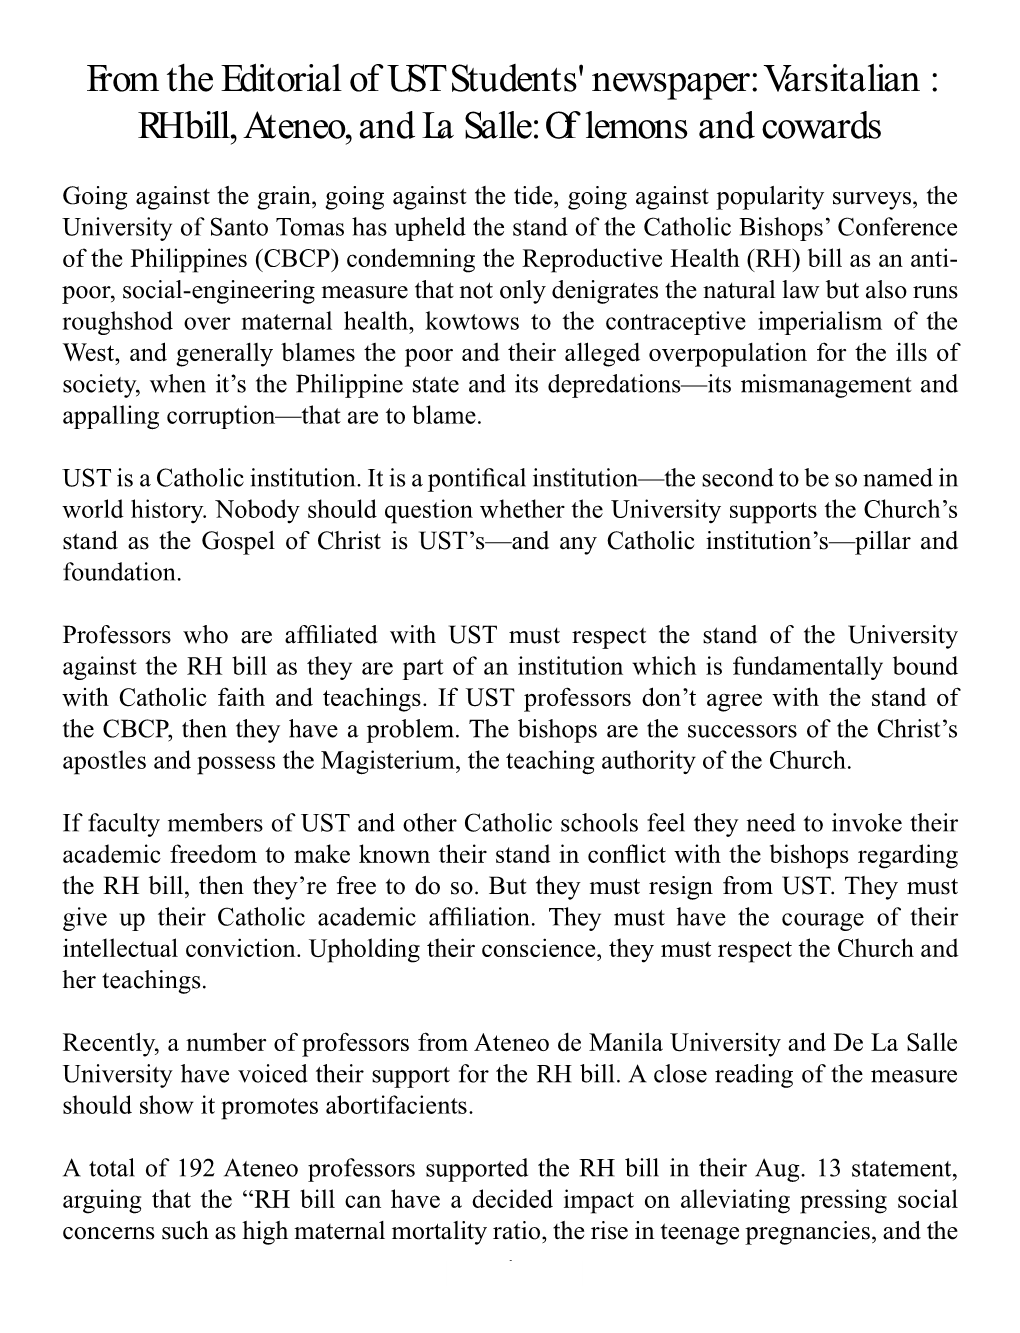 From the Editorial of UST Students' Newspaper: Varsitalian : RH Bill, Ateneo, and La Salle: of Lemons and Cowards